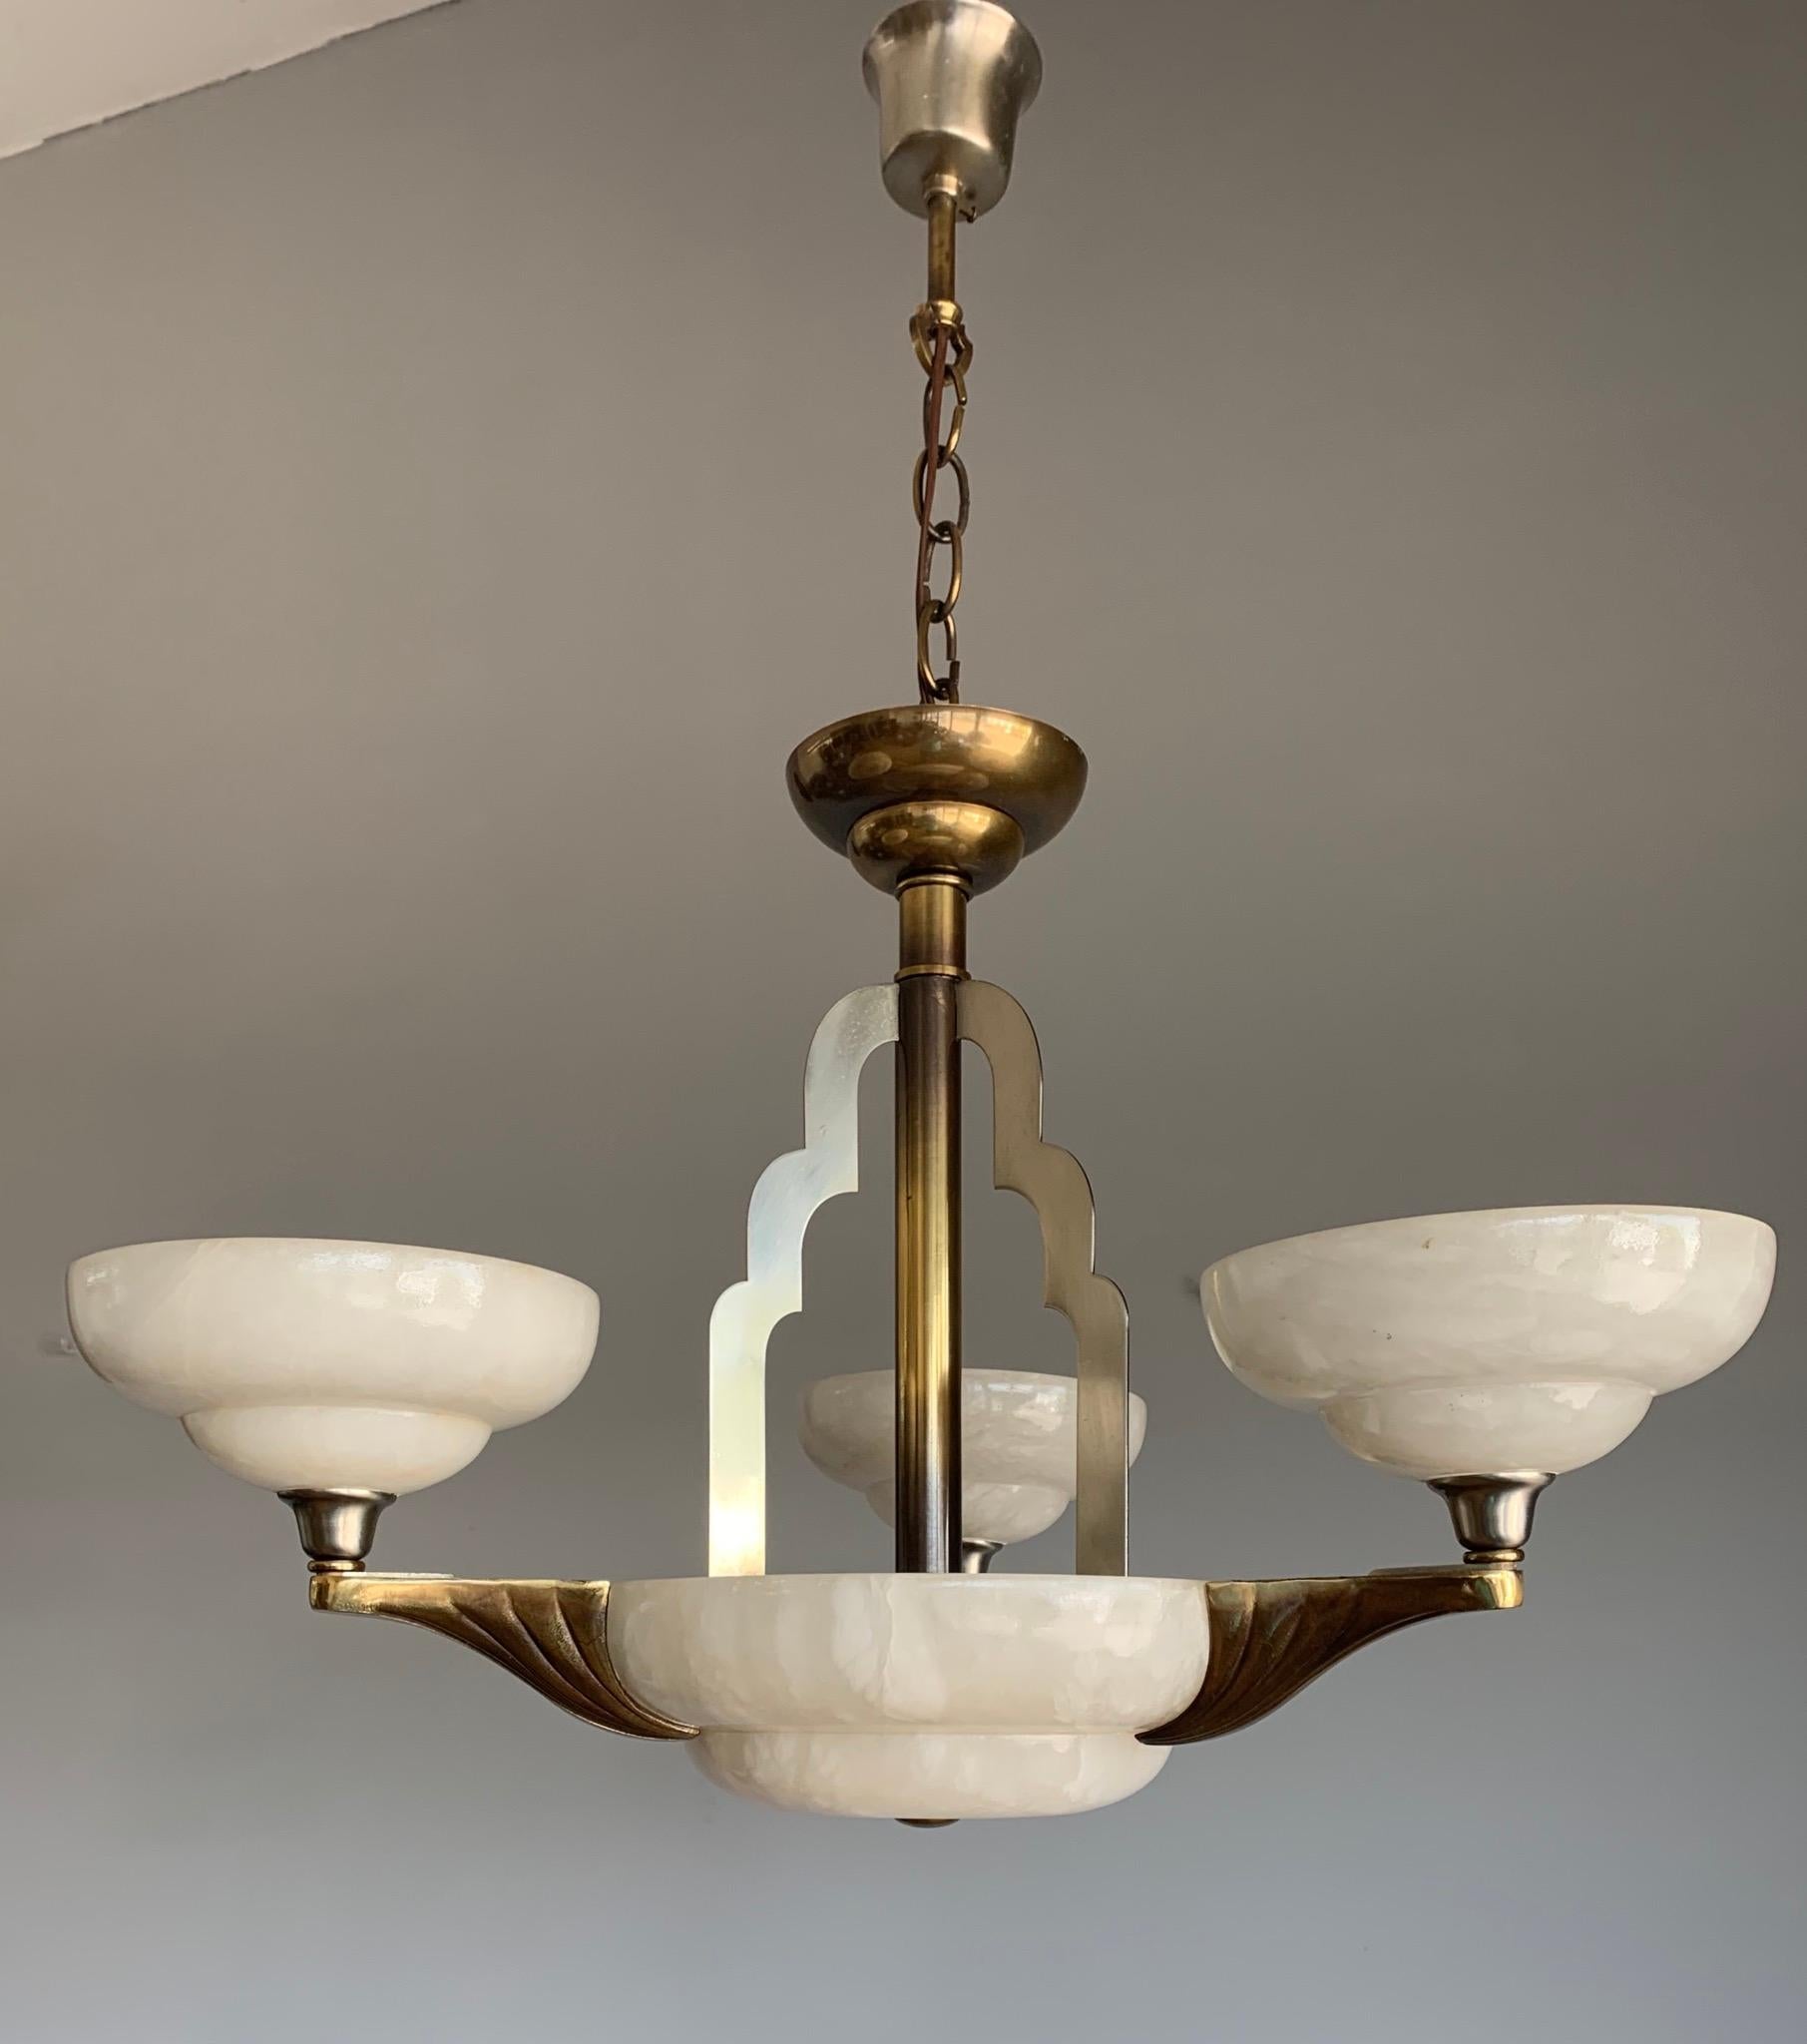 Excellent condition and great design, 3-arms and 6-light chandelier.

If you like Art Deco style light fixtures, then this 1970s alabaster and bronze chandelier could be perfect for you. The combination of the white shades and the stunning, golden